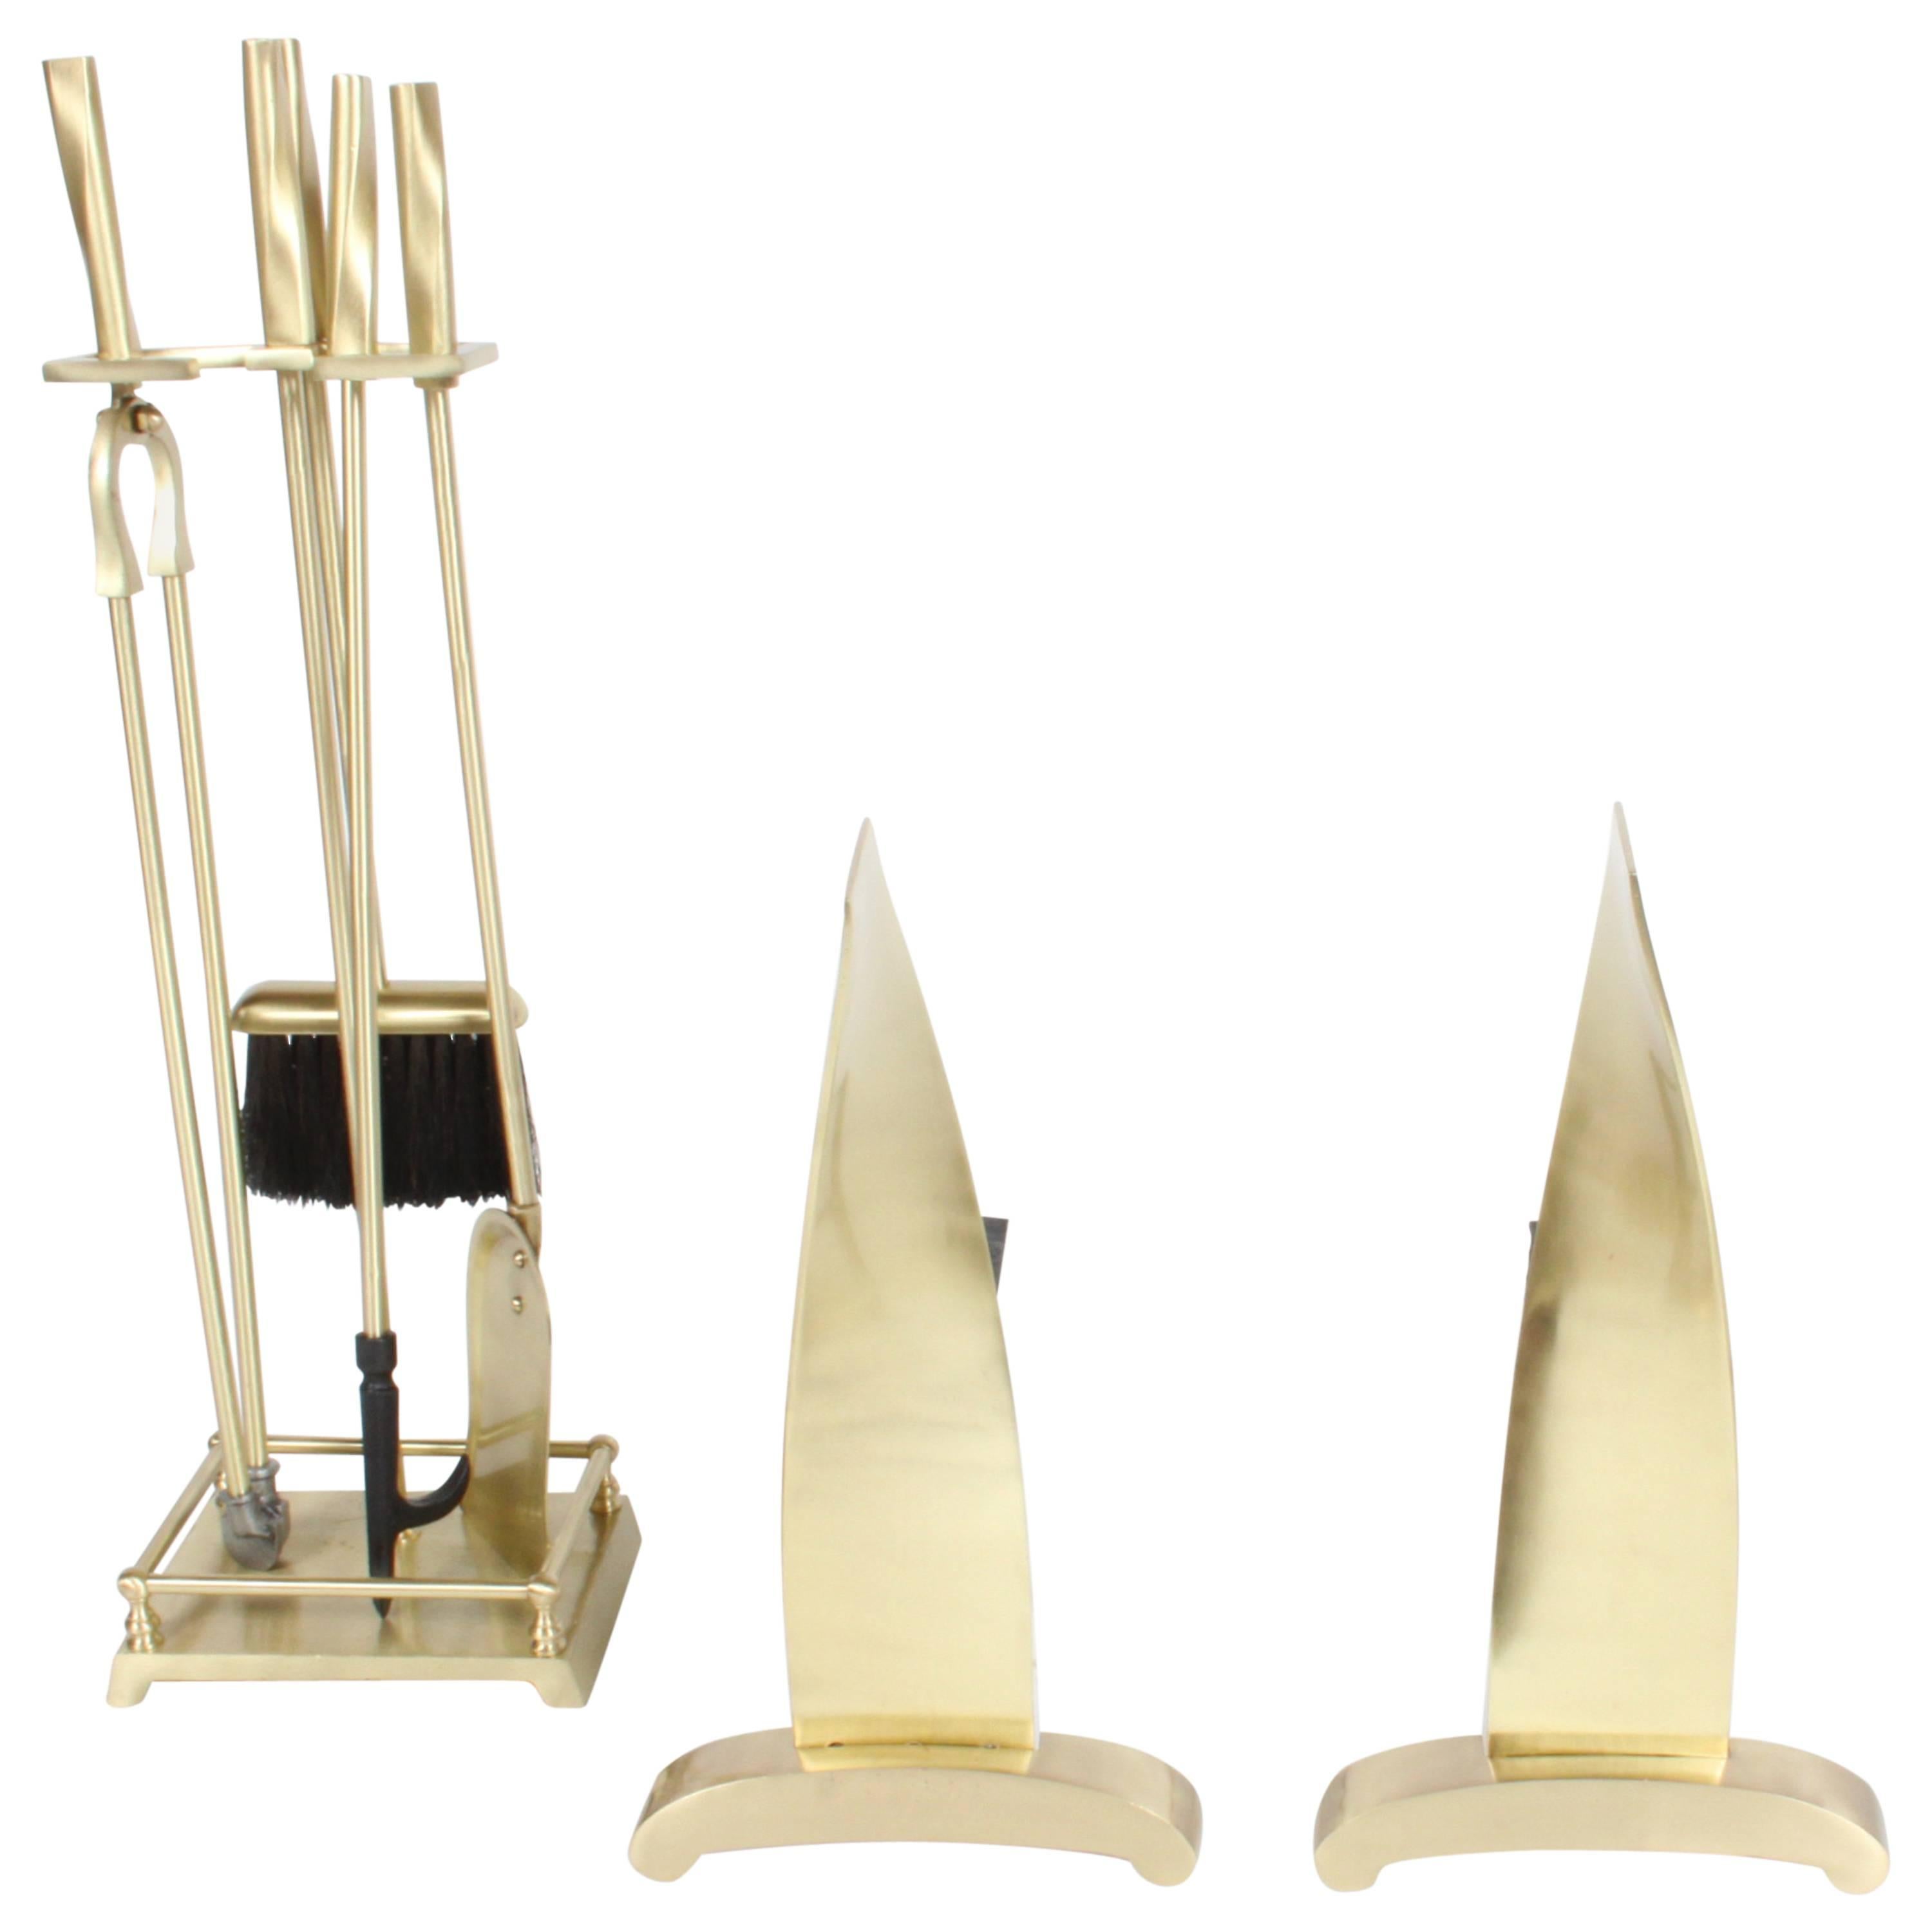 Brass Art Deco Modern torqued Andirons and Fire Tools Set, Deskey Style For Sale